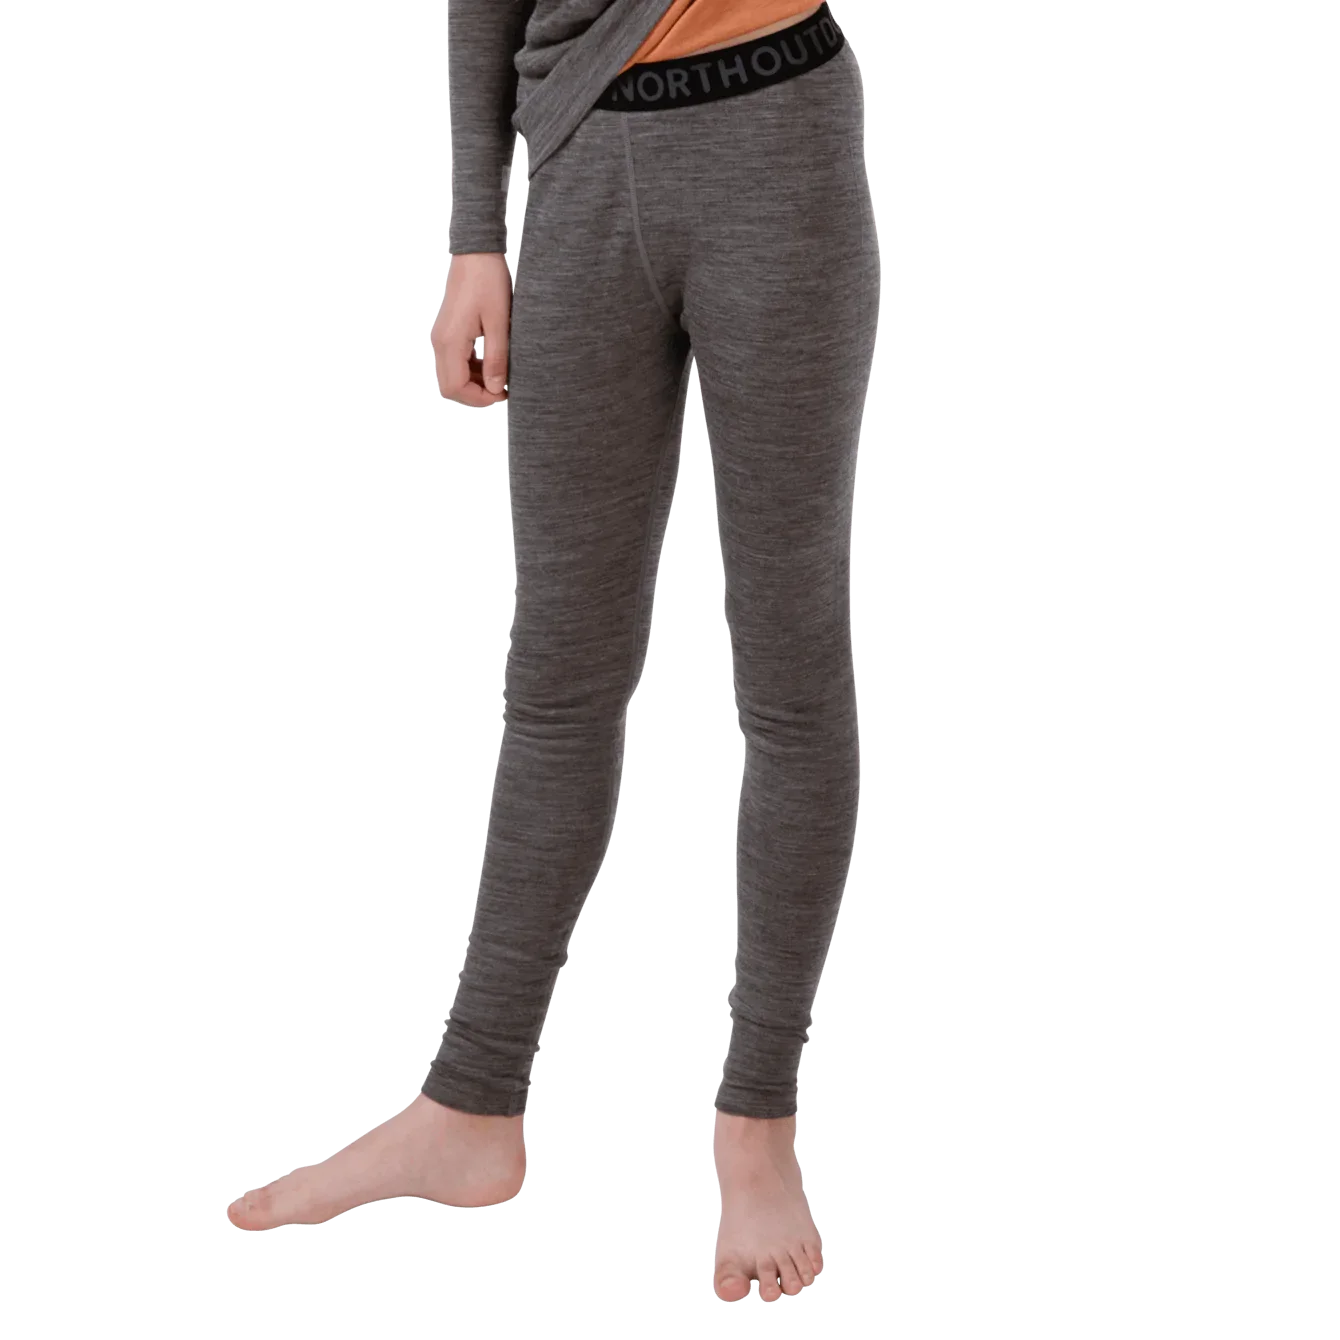 north-outdoor-sensitive-225-youth-pants-grey-salmon-pose-2-front-fw19-n52002g02-crop_1800x1800